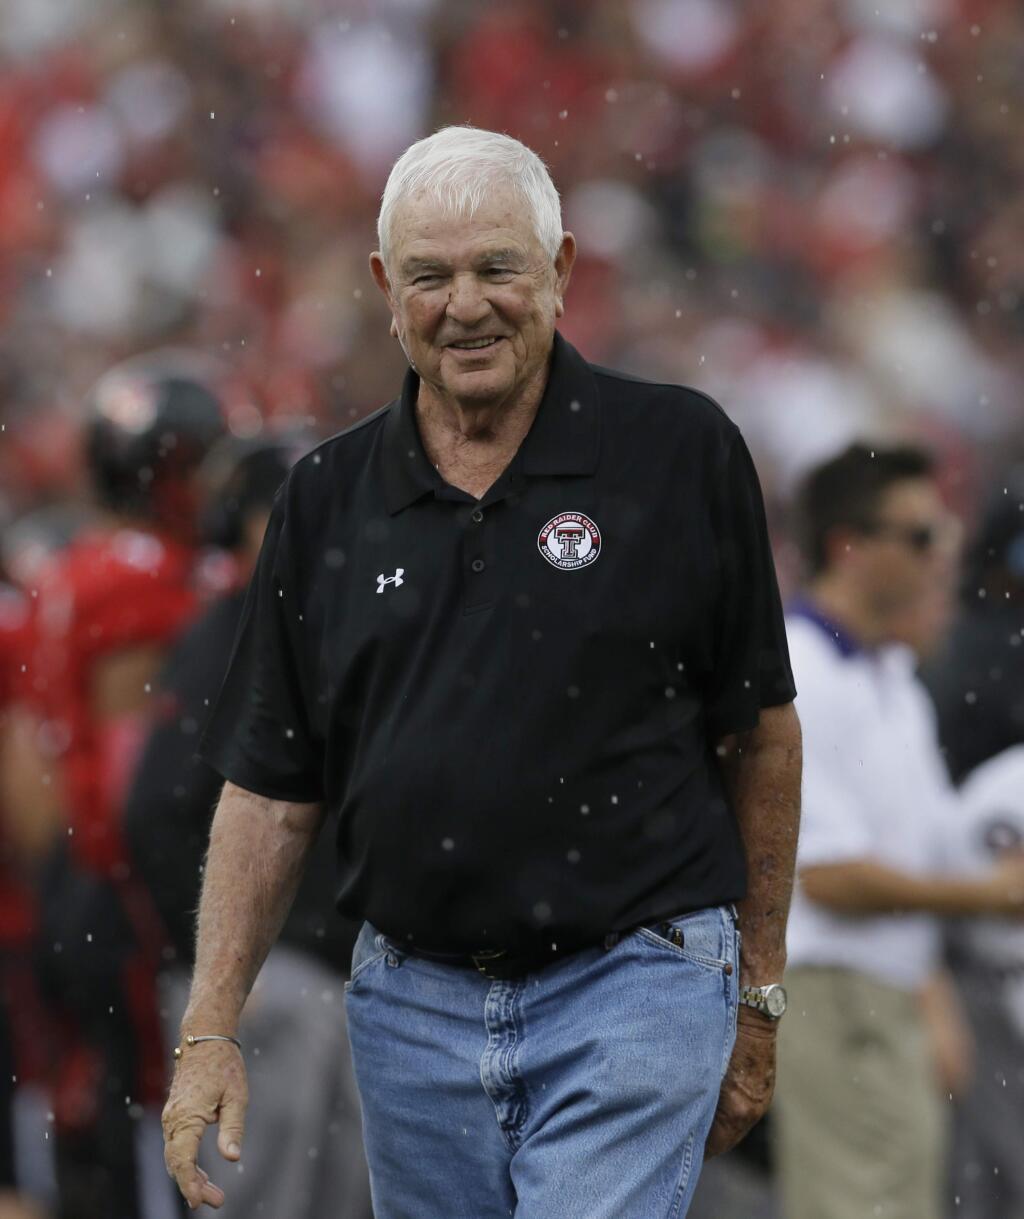 FILE - In this Sept. 26, 2015, file photo, former Texas Tech football coach Spike Dykes walks the field during the first half of an NCAA college football game in Lubbock, Texas. Dykes son, Sonny Dykes, is head coach for the California football team. (AP Photo/LM Otero, file)